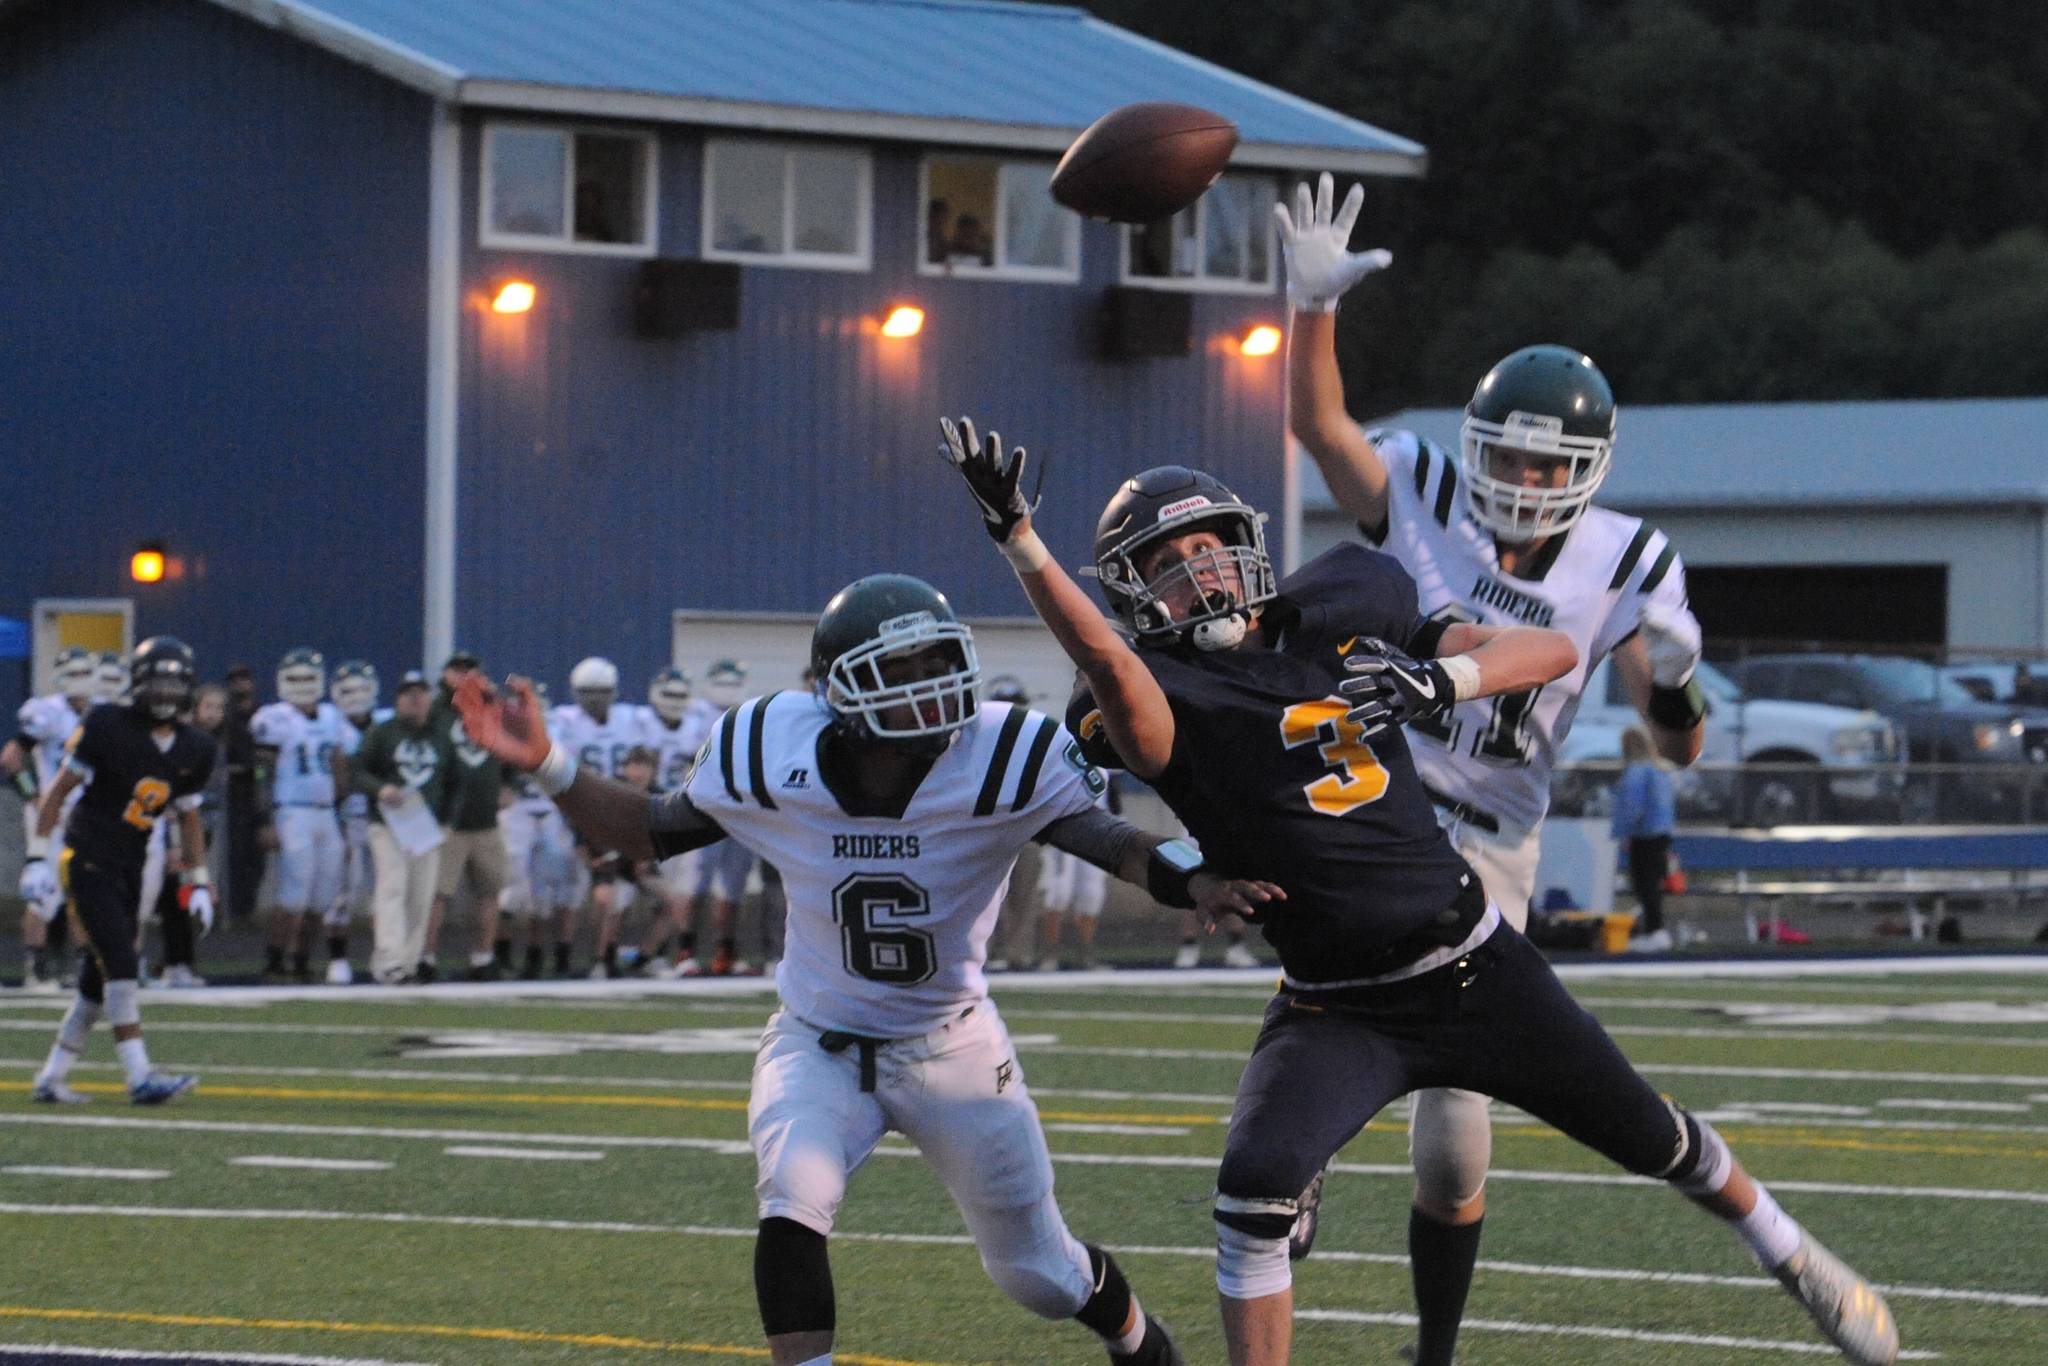 Spartan receiver Brett Moody eyes an overthrown pass in the end zone while Port Angeles defenders cover.